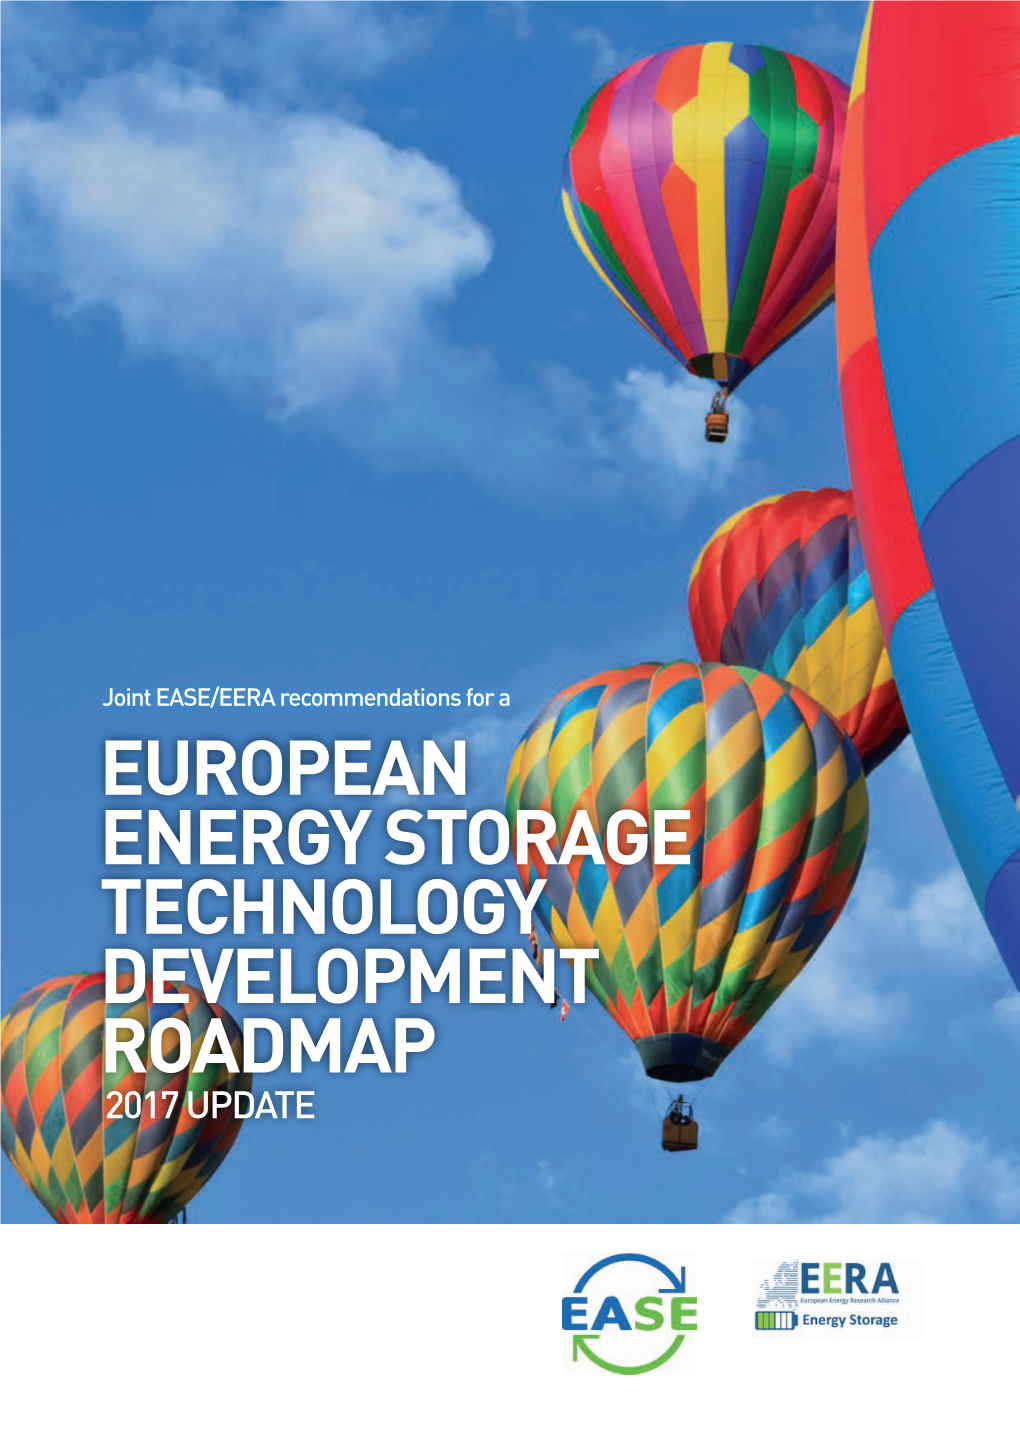 EASE-EERA Energy Storage Technology Development Roadmap 3 TABLE of CONTENTS